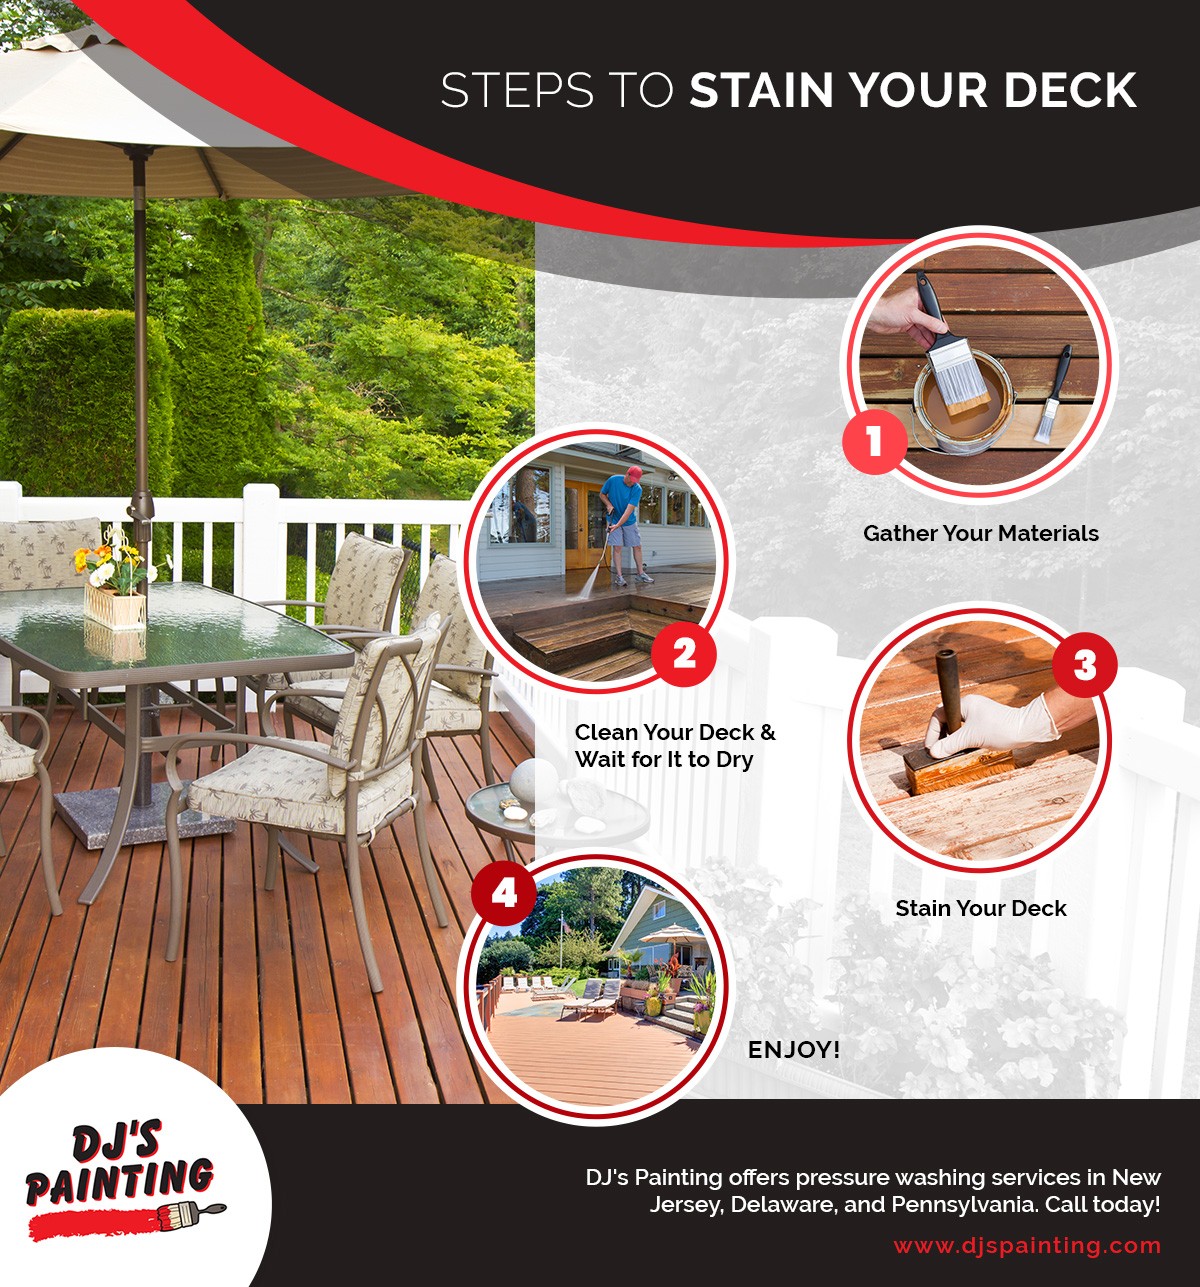 M7473 - DJs Painting_Steps to Stain Your Deck_Infographic